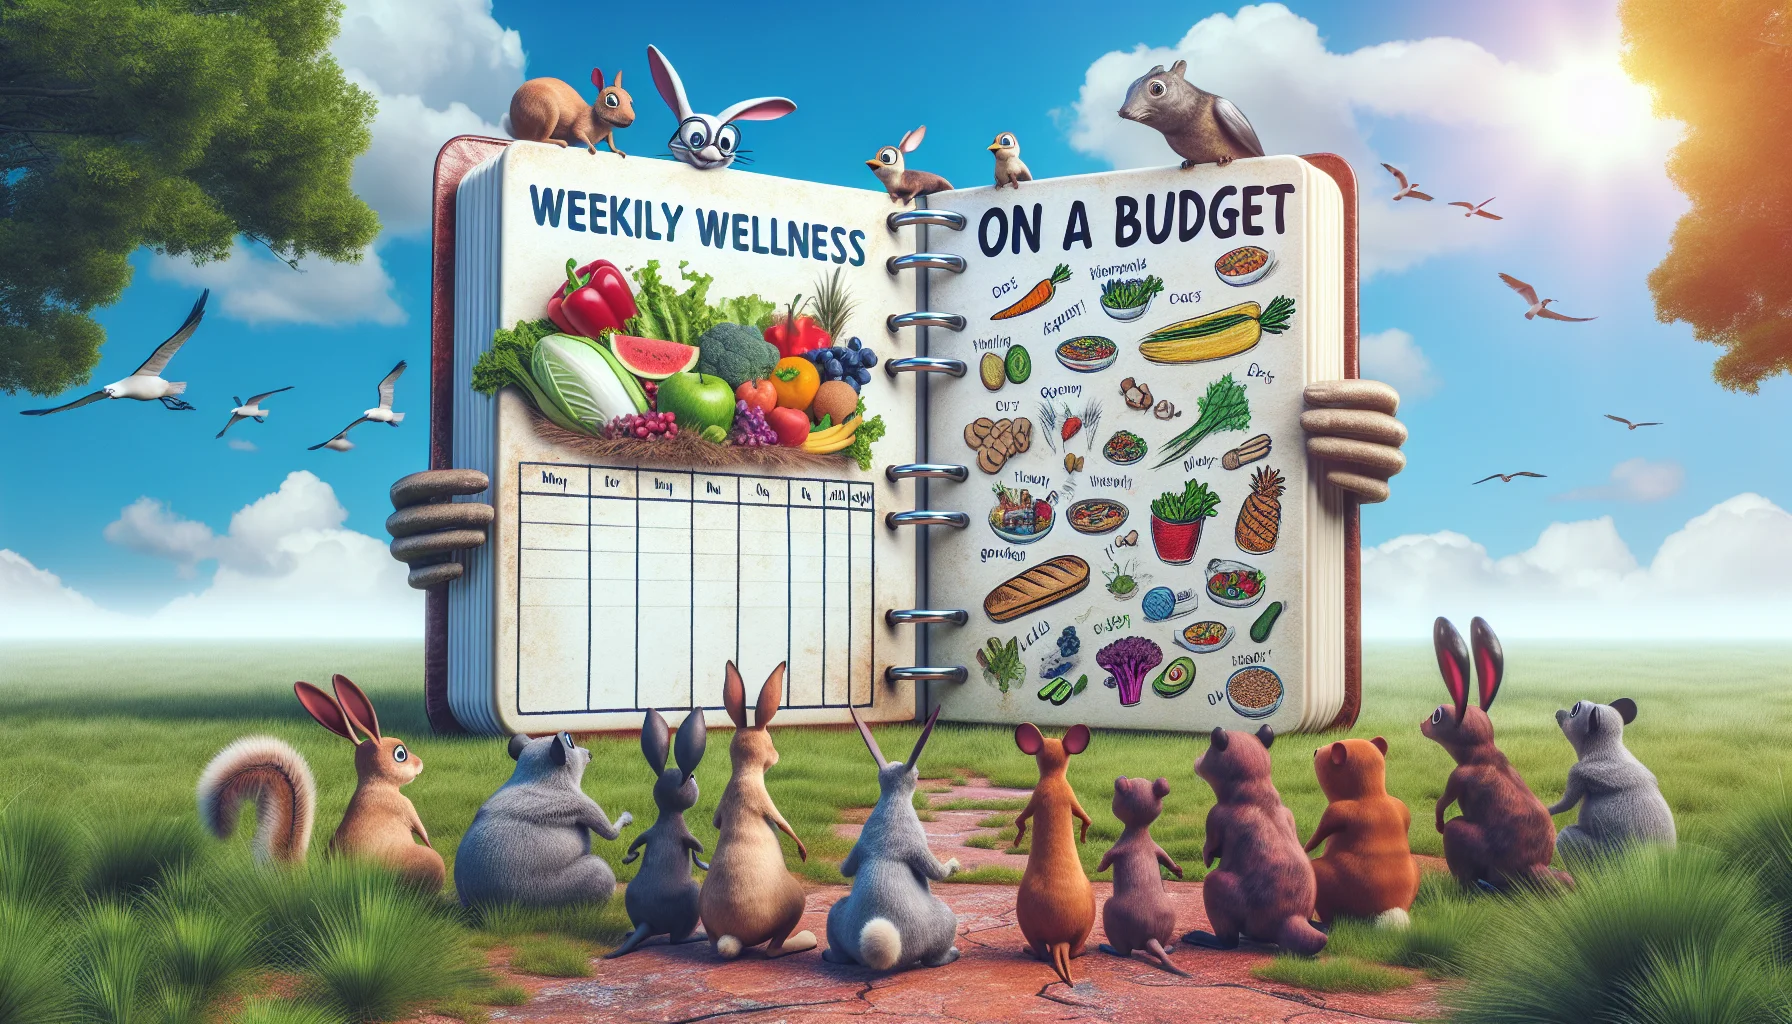 Create a humorous and realistic scene representing a 'Weekly Wellness Recap.' In the center, feature an oversized animated ledger book with pages titled 'Healthy Eating on a Budget.' On these pages, show various colorful sketched images related to affordable healthy food options like fresh fruits, vegetables, grains, and other low-cost but nutrient-rich items. In the scene, include a group of animals such as a rabbit, squirrel, and bird interestedly looking at the book, depicting humor and the idea that even they are keen on eating healthy. Sky is clear and sunny, reflecting a positive vibe. Let's inspire people to eat healthy without breaking the bank in a fun way.